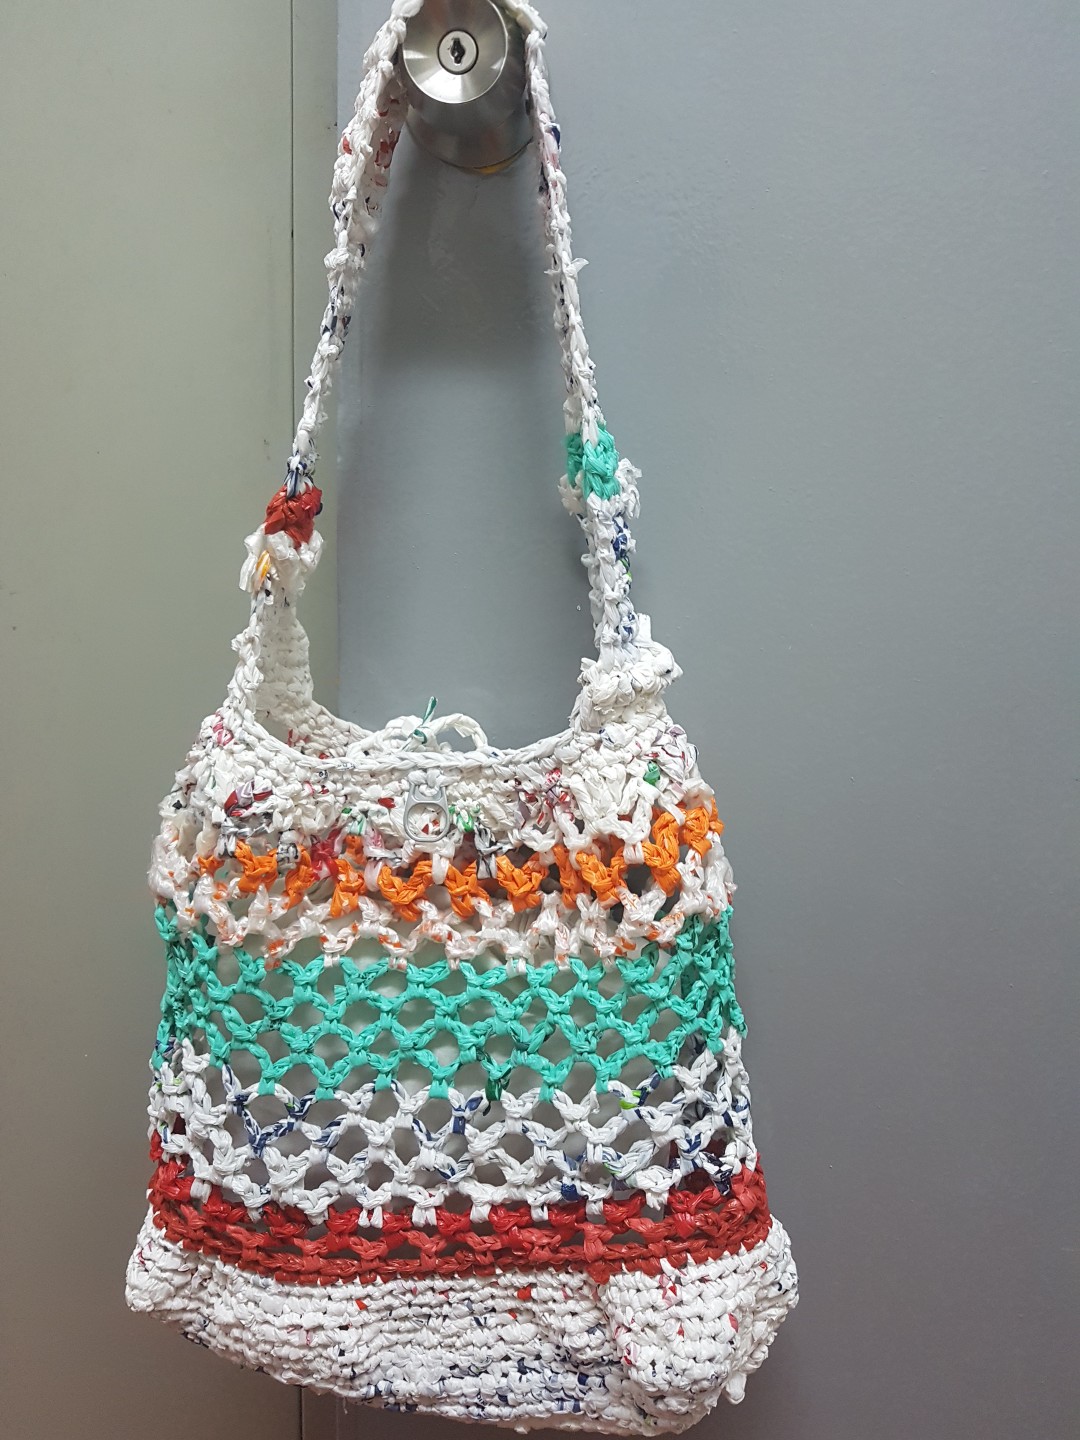 Handmade waterproof bag made from recycled materials, Women's